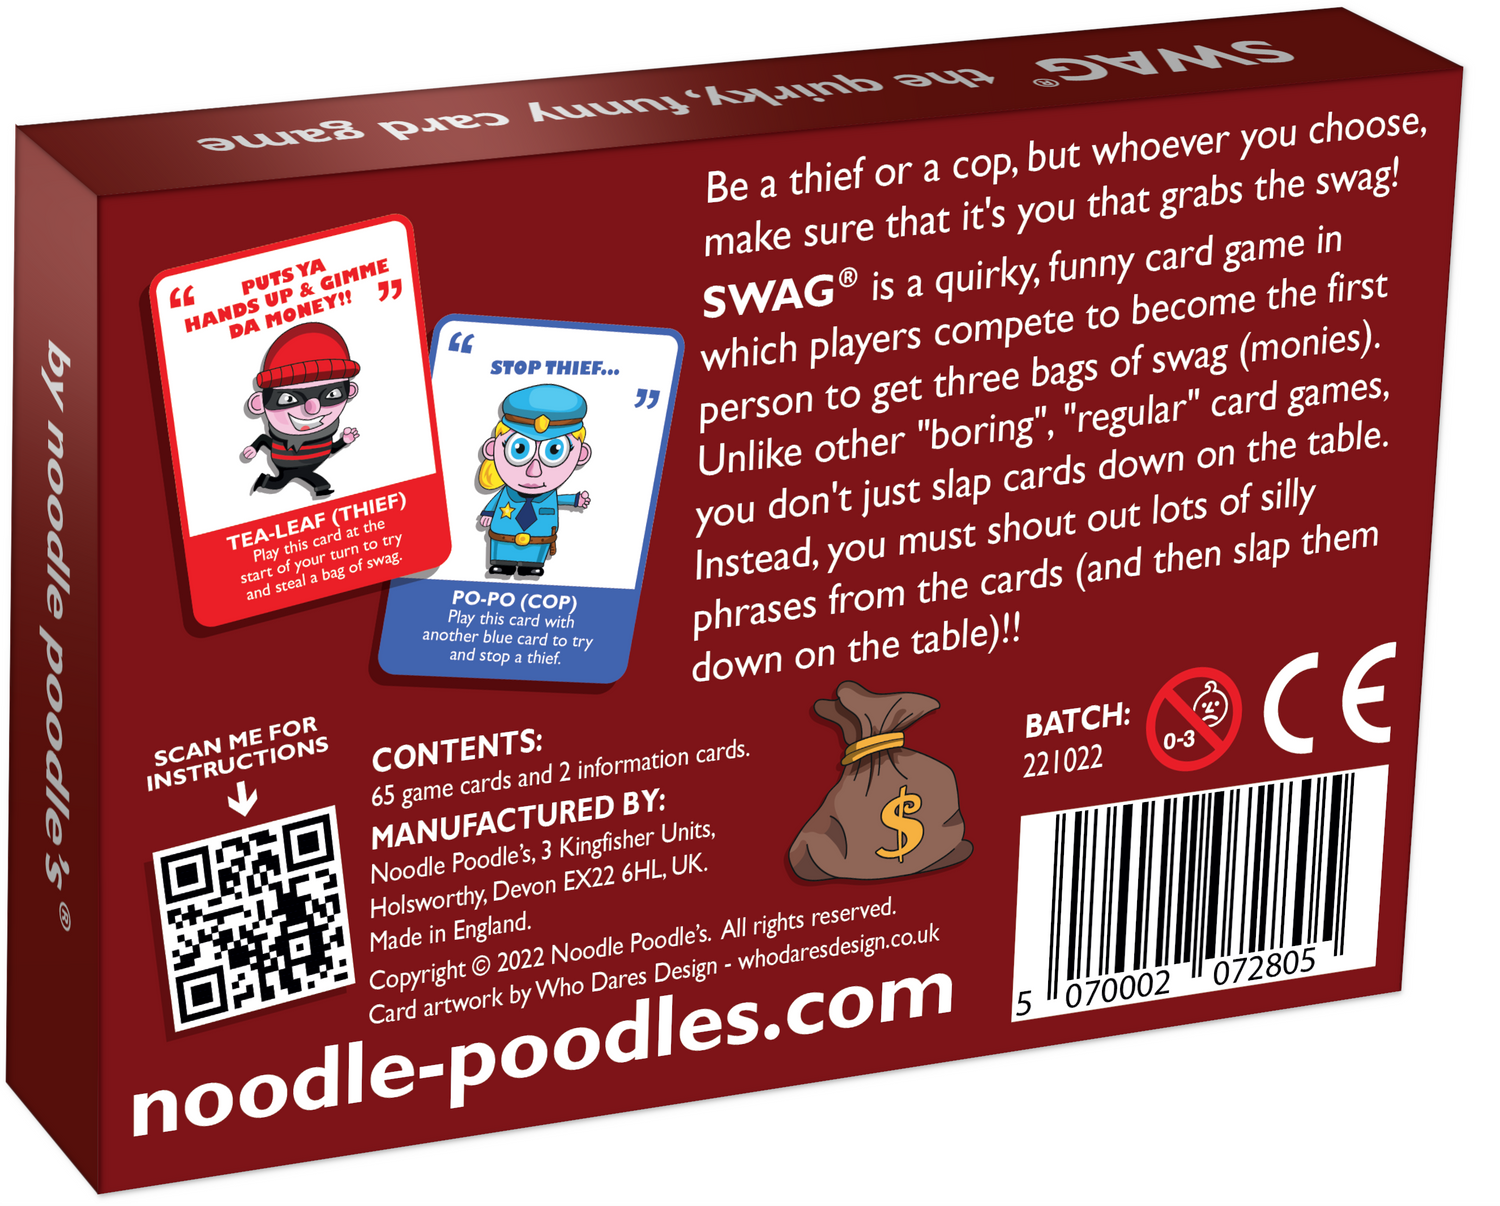 Ethical Game: SWAG - A quirky card game for competitive fun and silly shouts (20% OFF!)